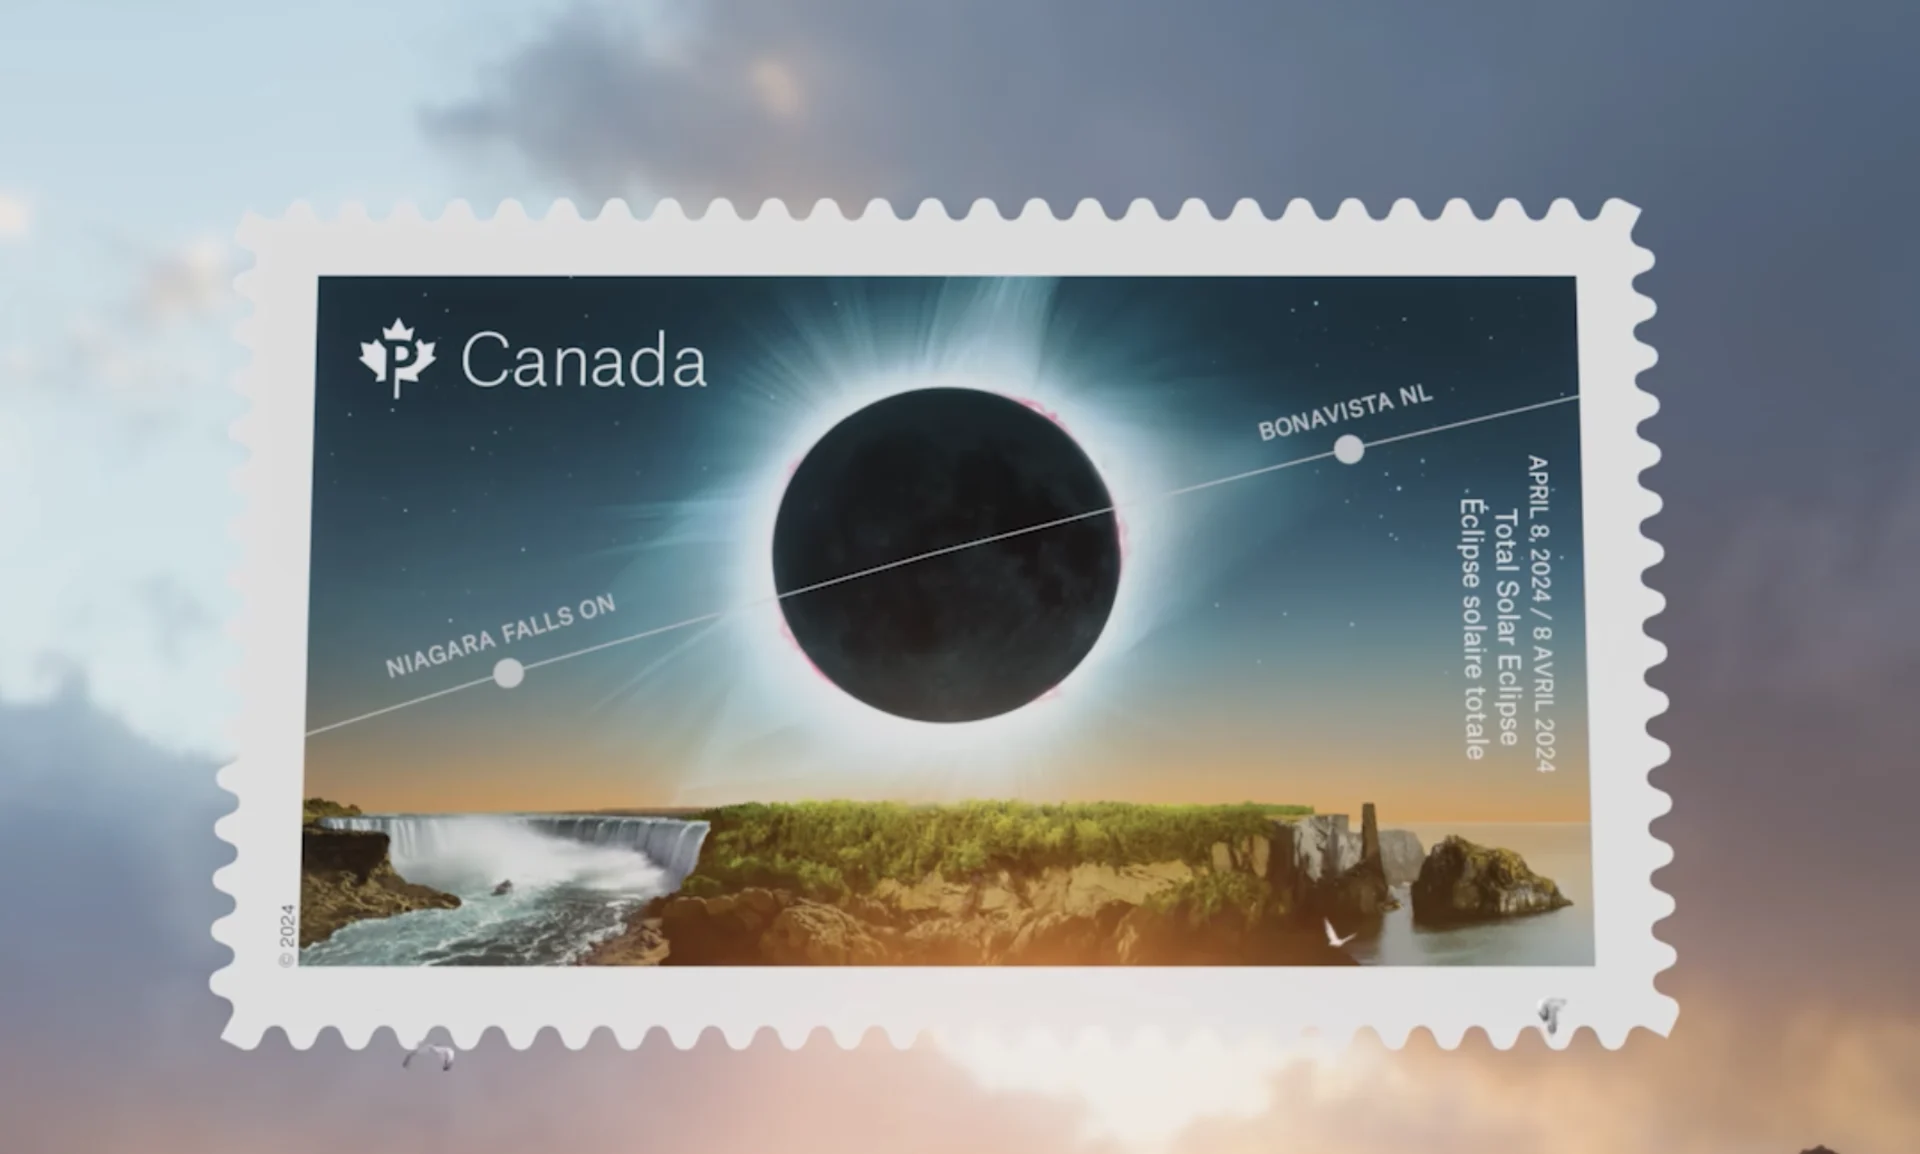 Canada Post commemorates April's solar eclipse with new stamp